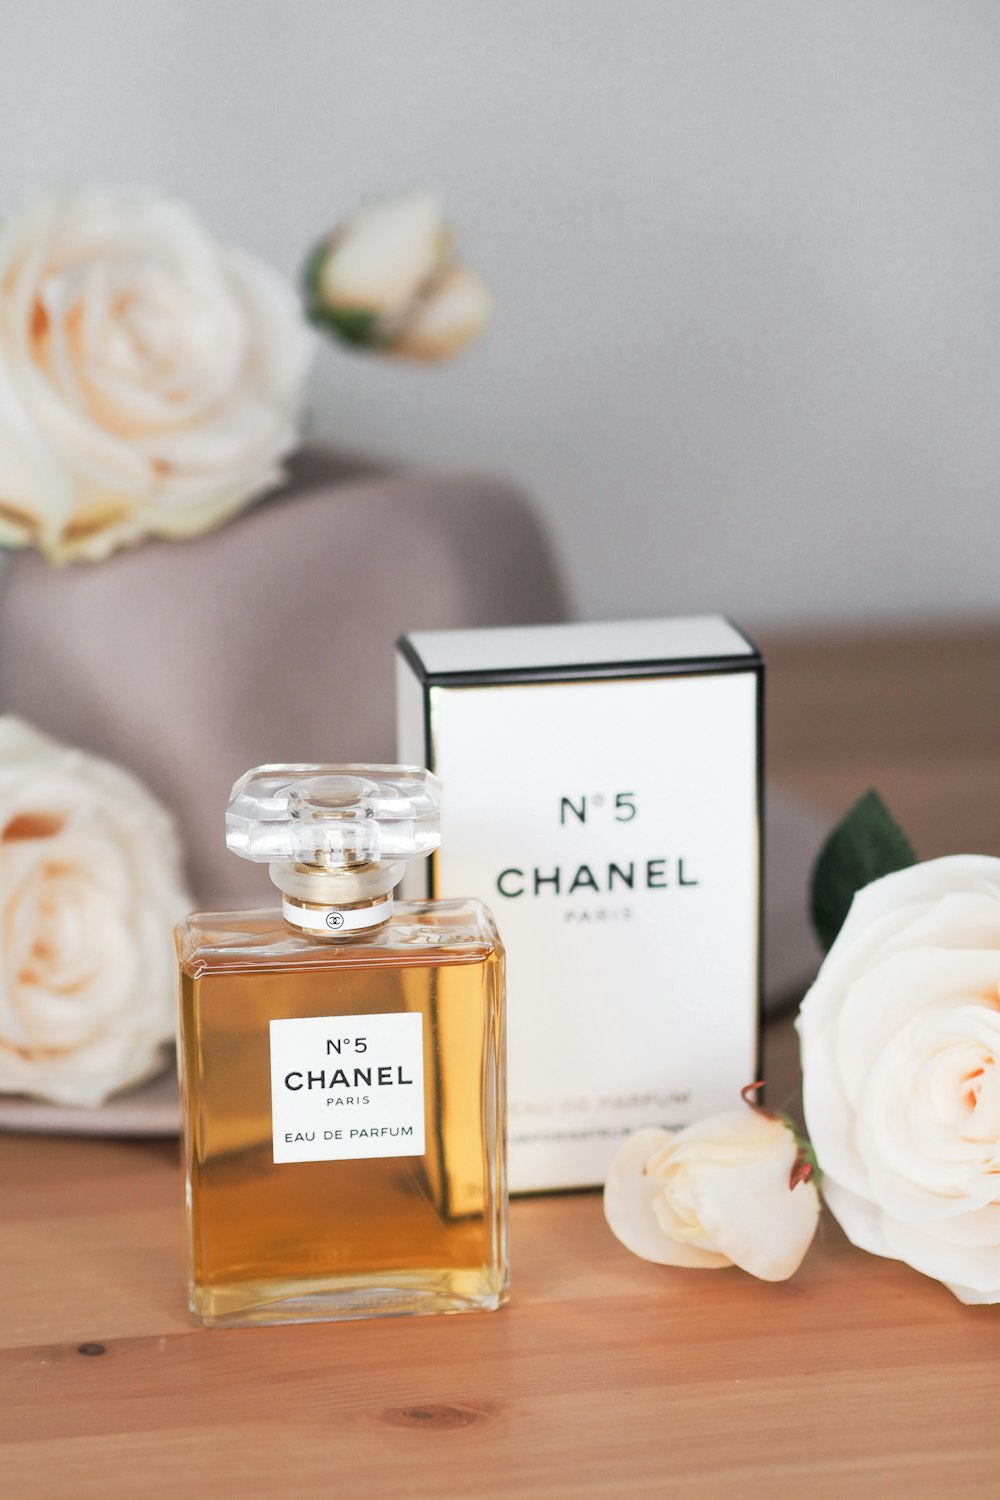 A bottle of chanel perfume next to a box of flowers photo – Free Grey Image  on Unsplash